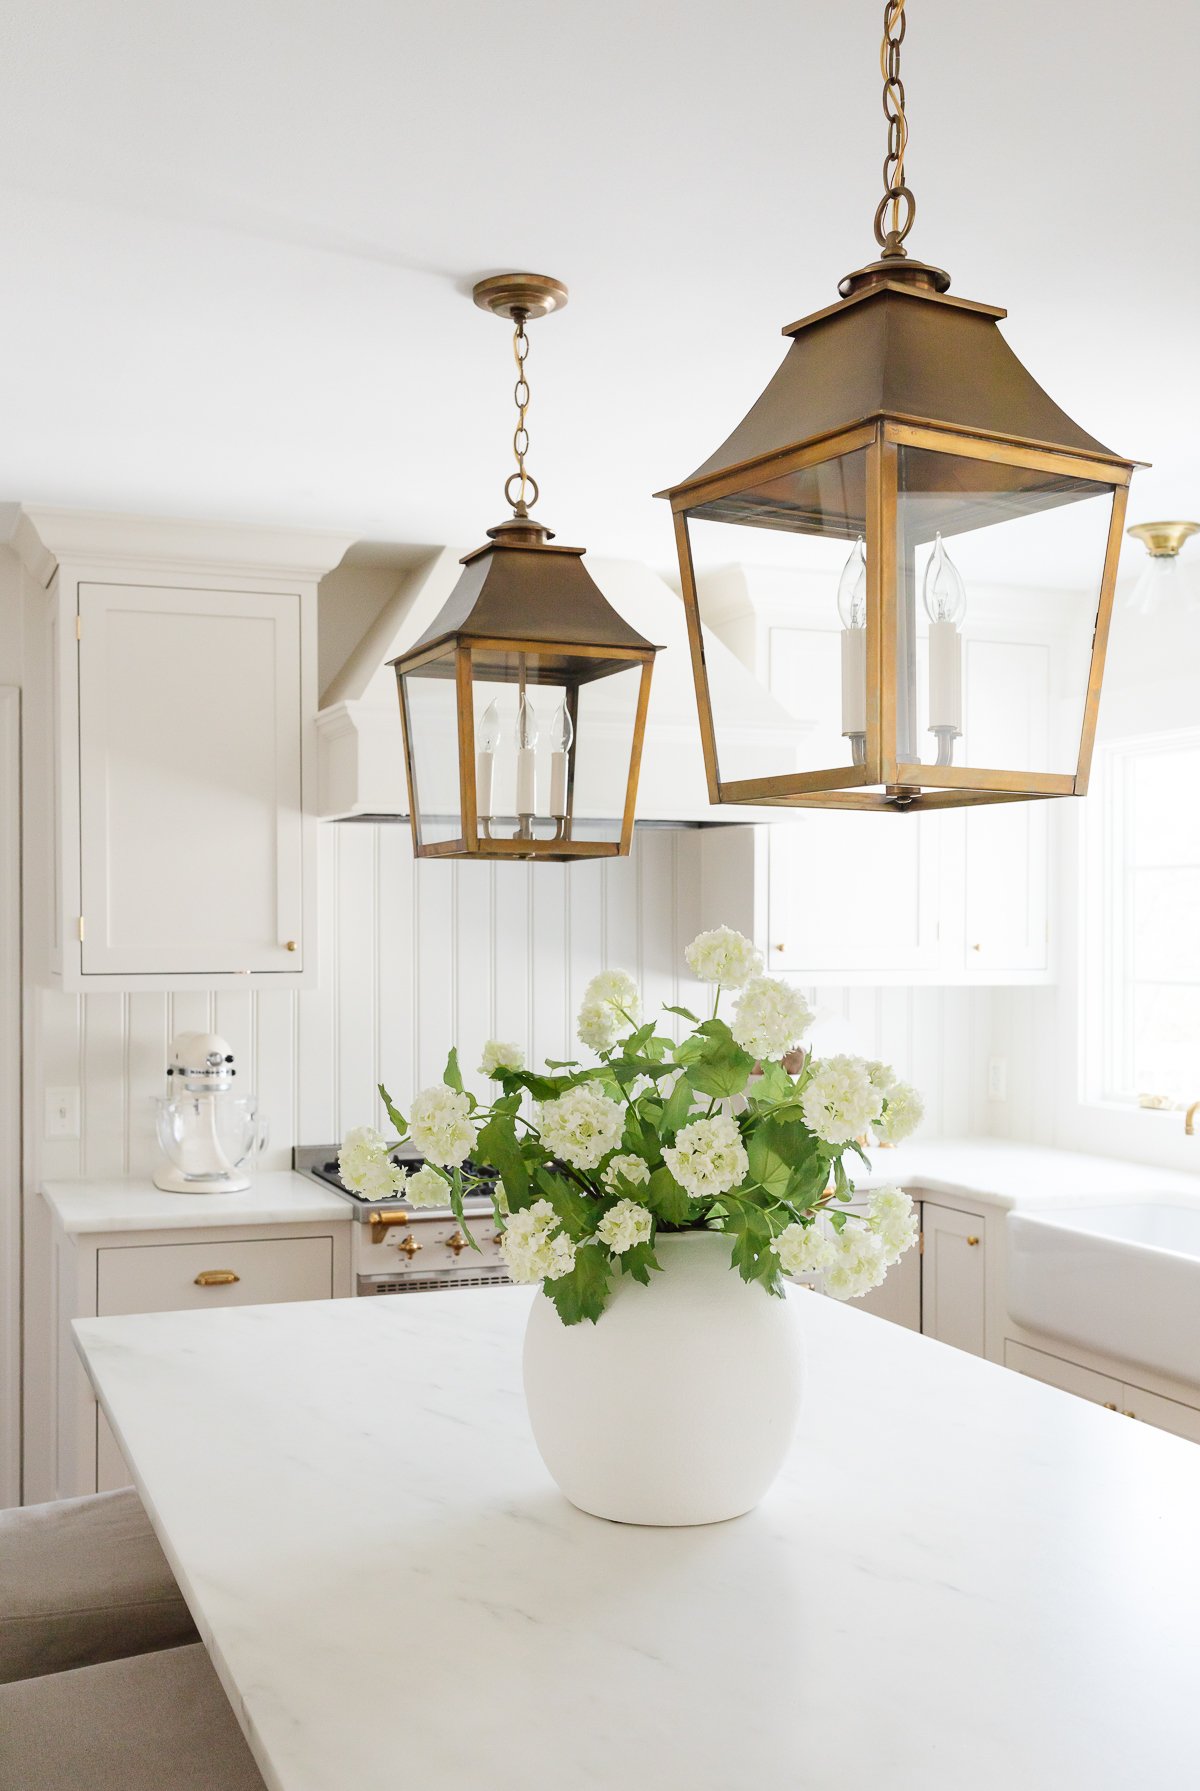 large vase of flowers in cream kitchen with brass light fixtures